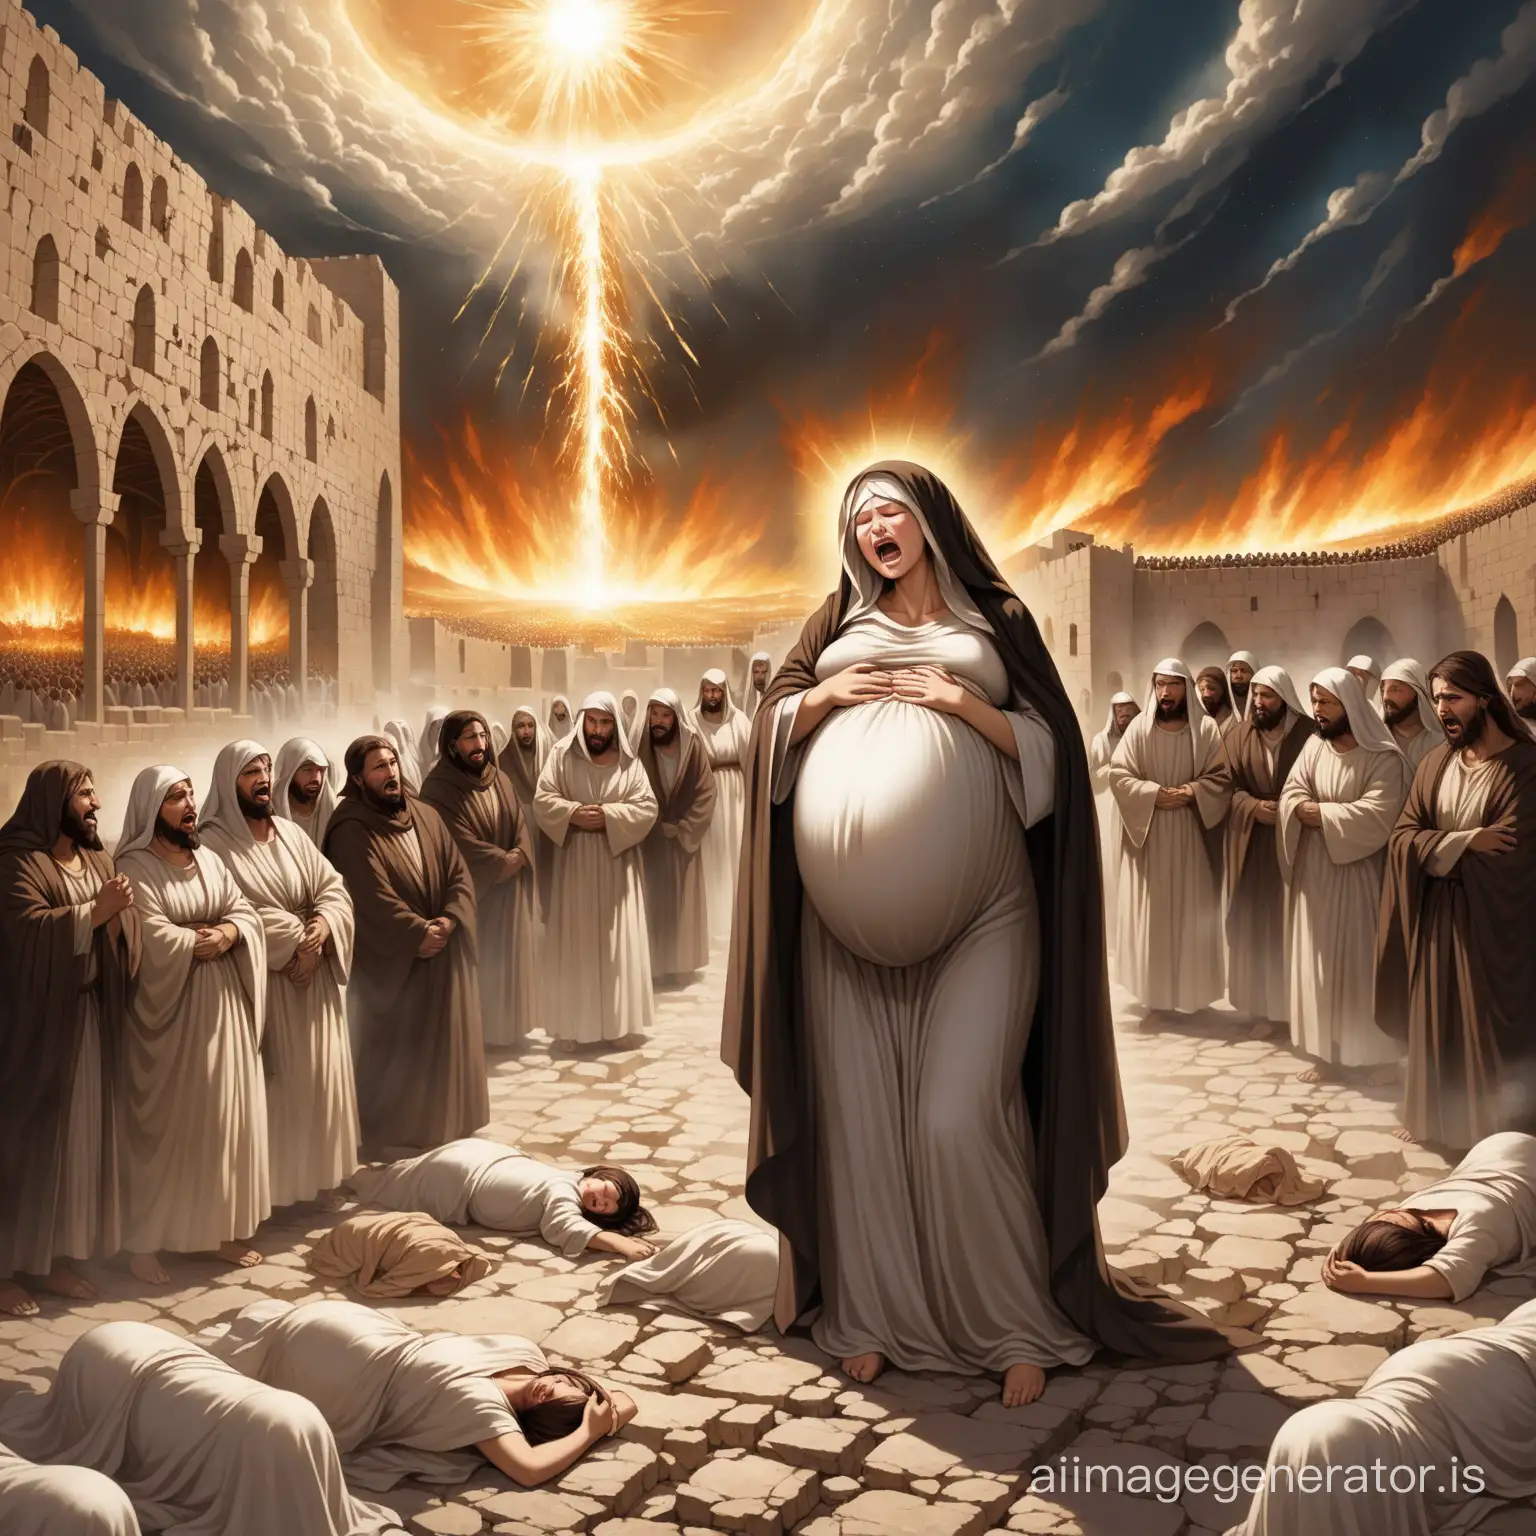 Prophecy by Jesus of the Destruction of Jerusalem . Pregnant woman crying of suffering in the middle of caos.